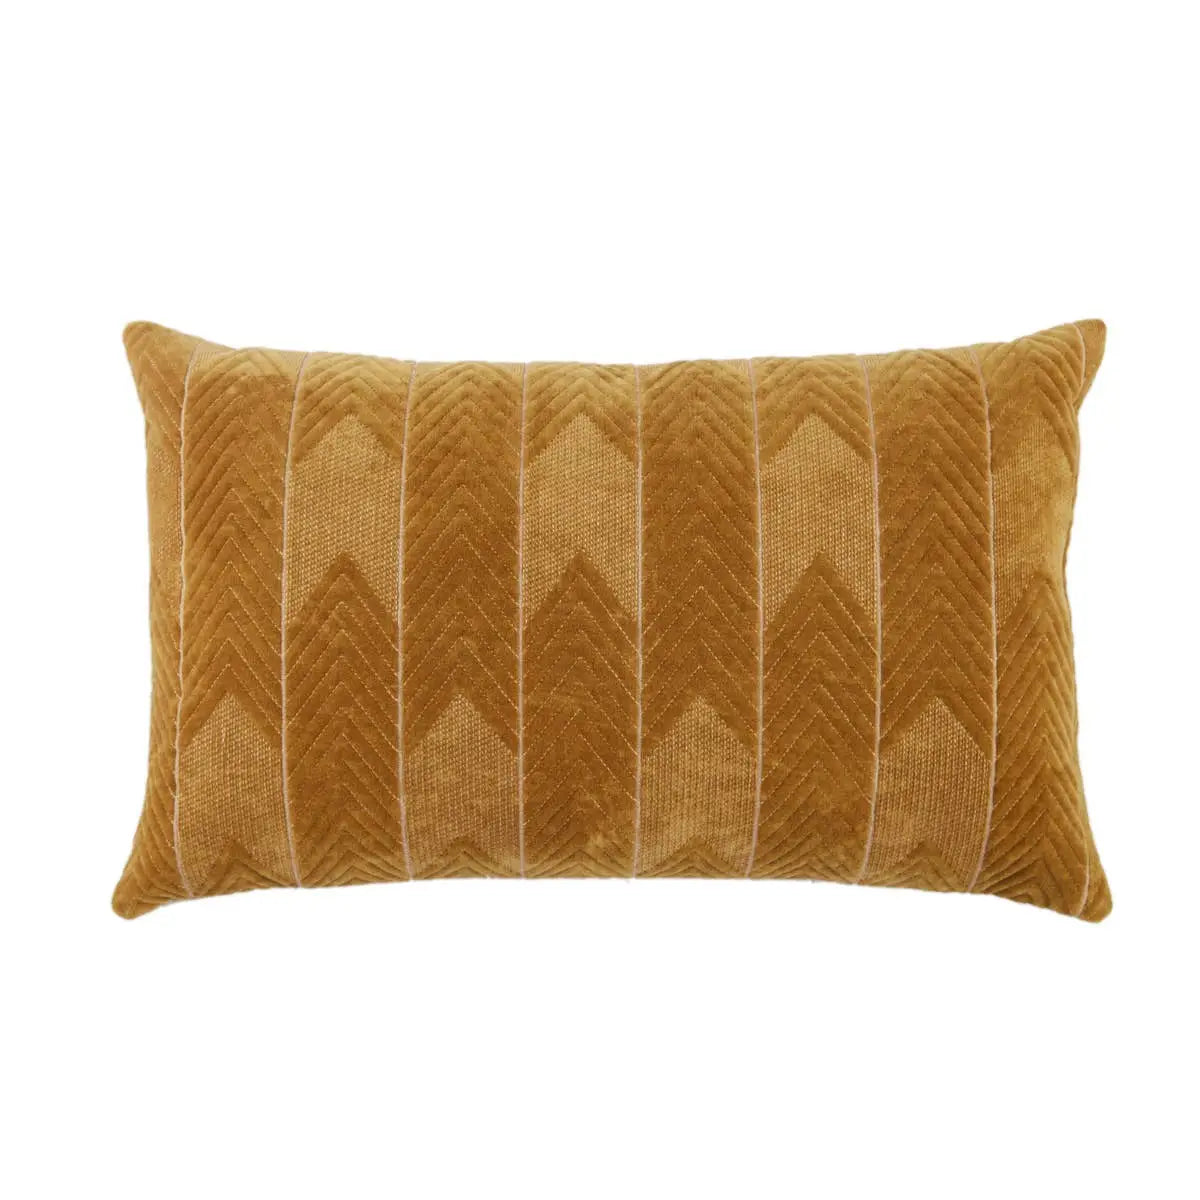 Lumbar Pillow: Classic lumbar pillow from Grace Blu Shoppe, designed to provide comfort and style to your home.